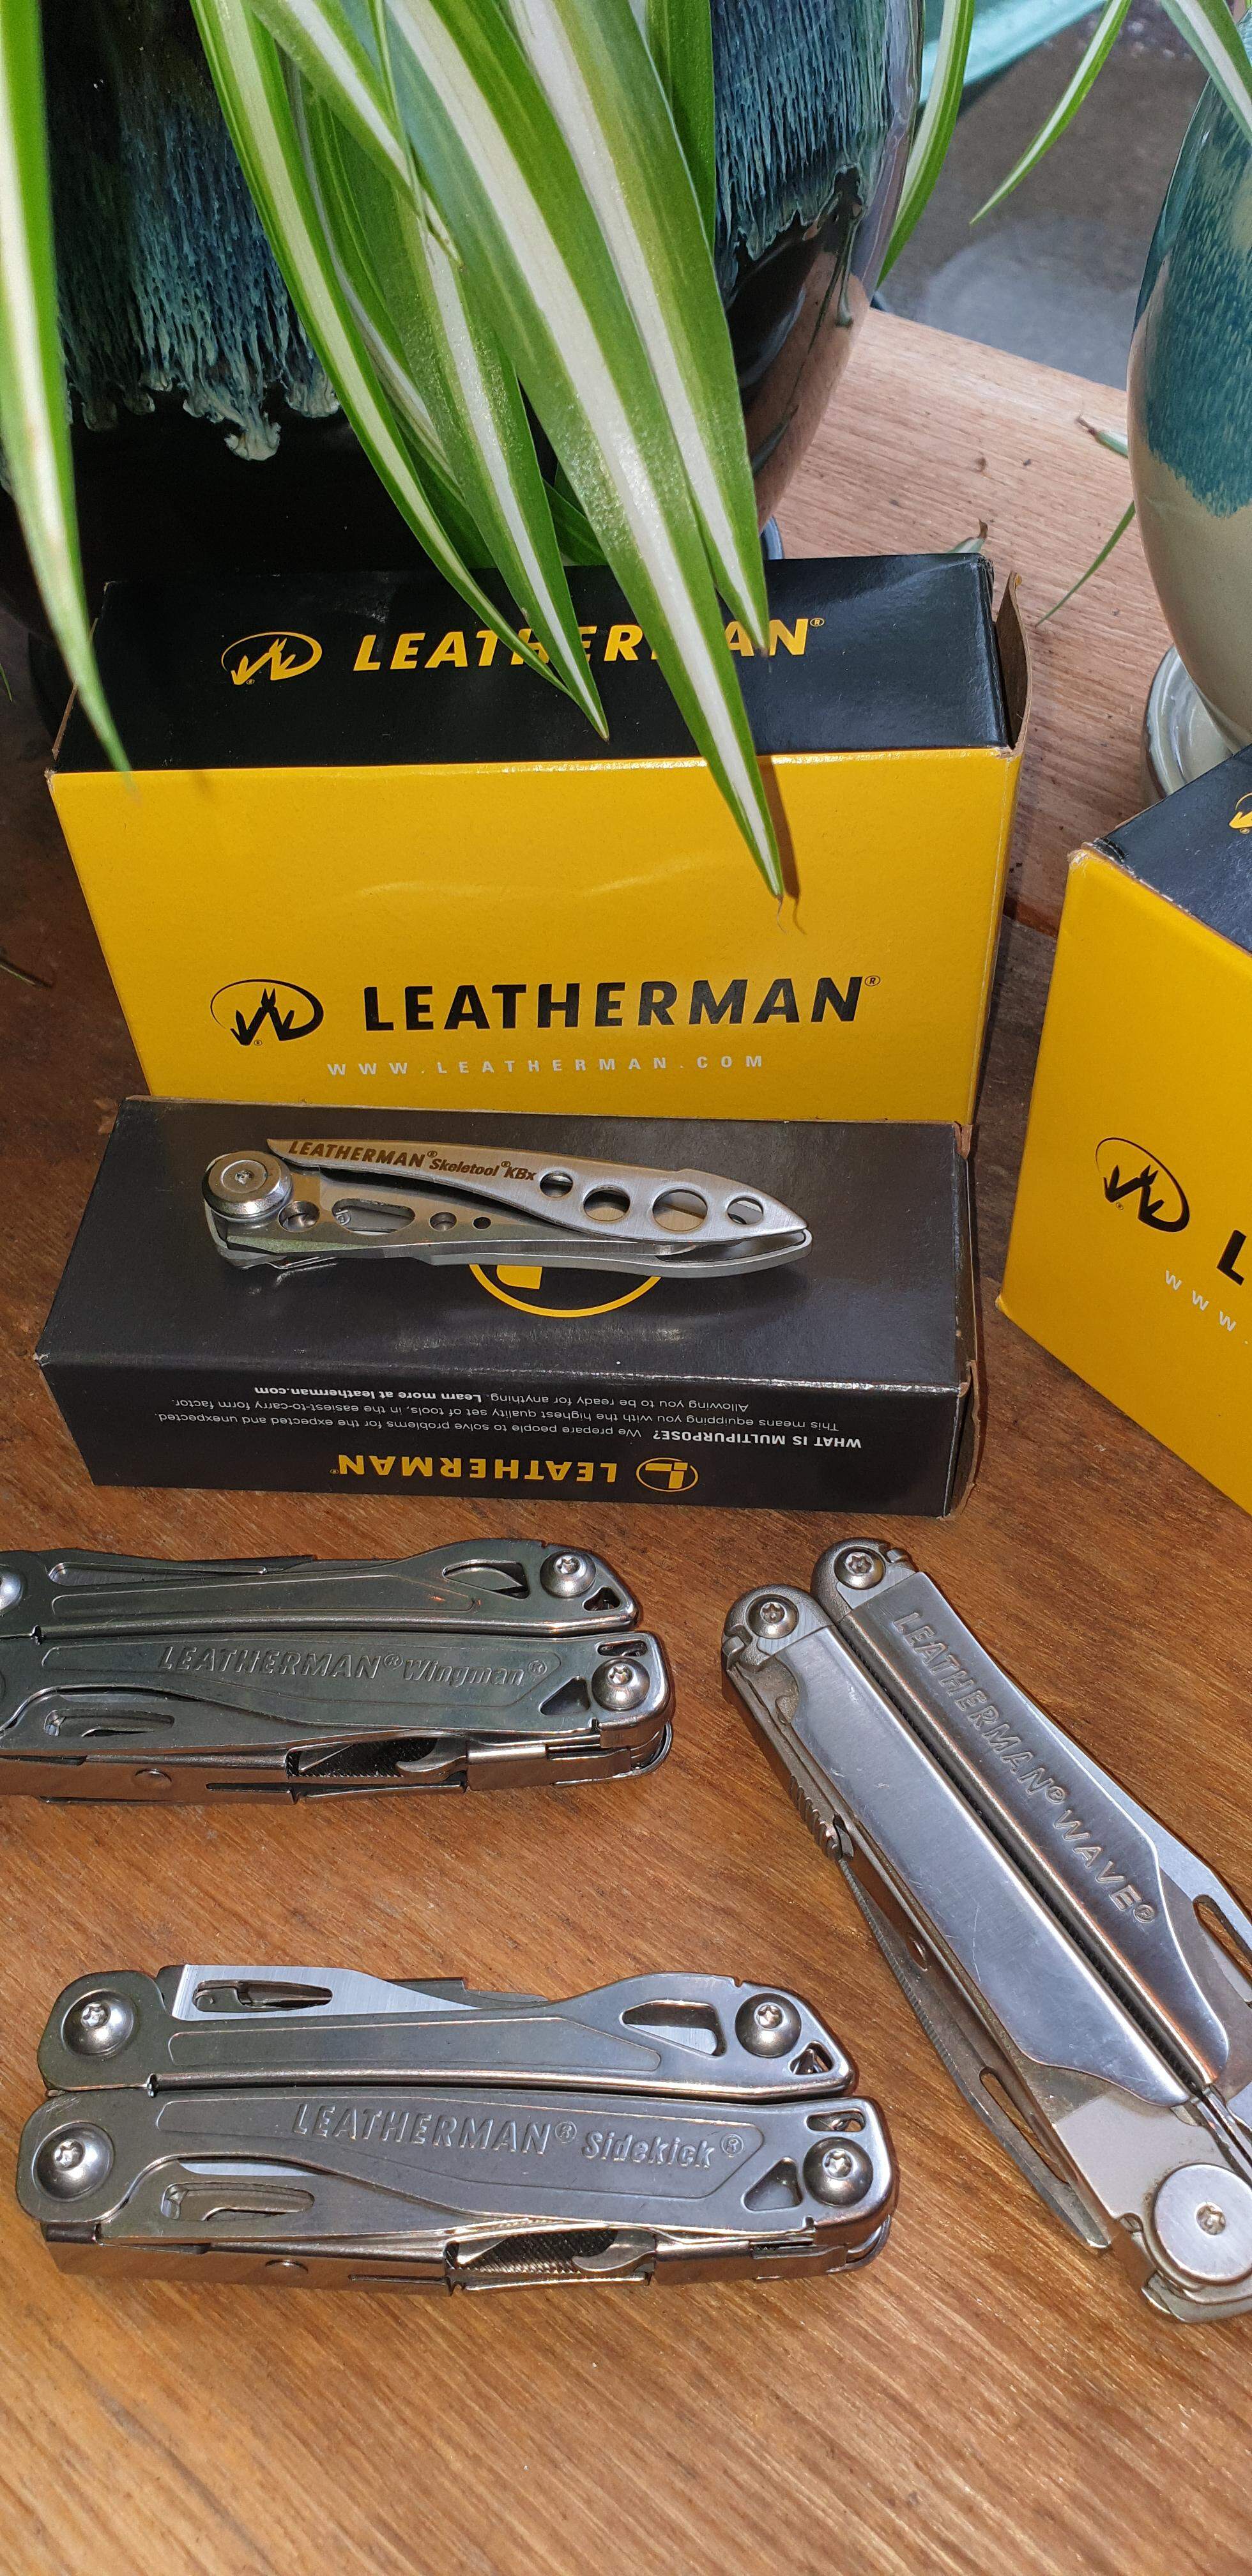 Full range of Leatherman multitools available in store